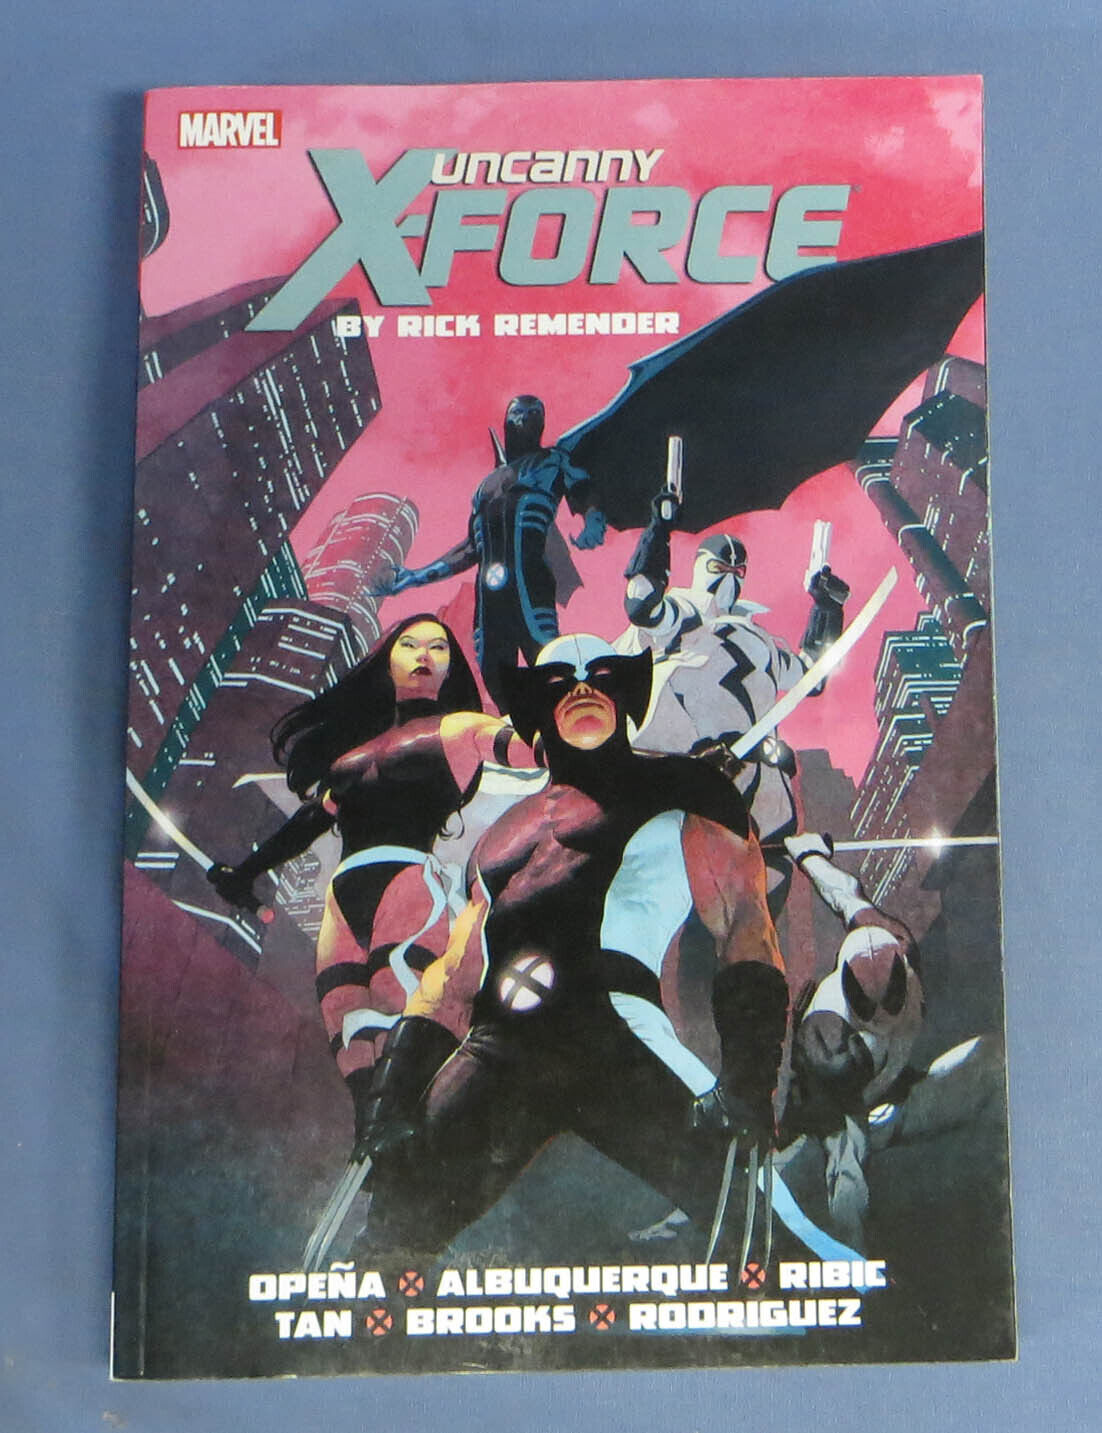 Marvel Uncanny X-Force by Rick Remender: The Complete Collection #1 2014 EXC